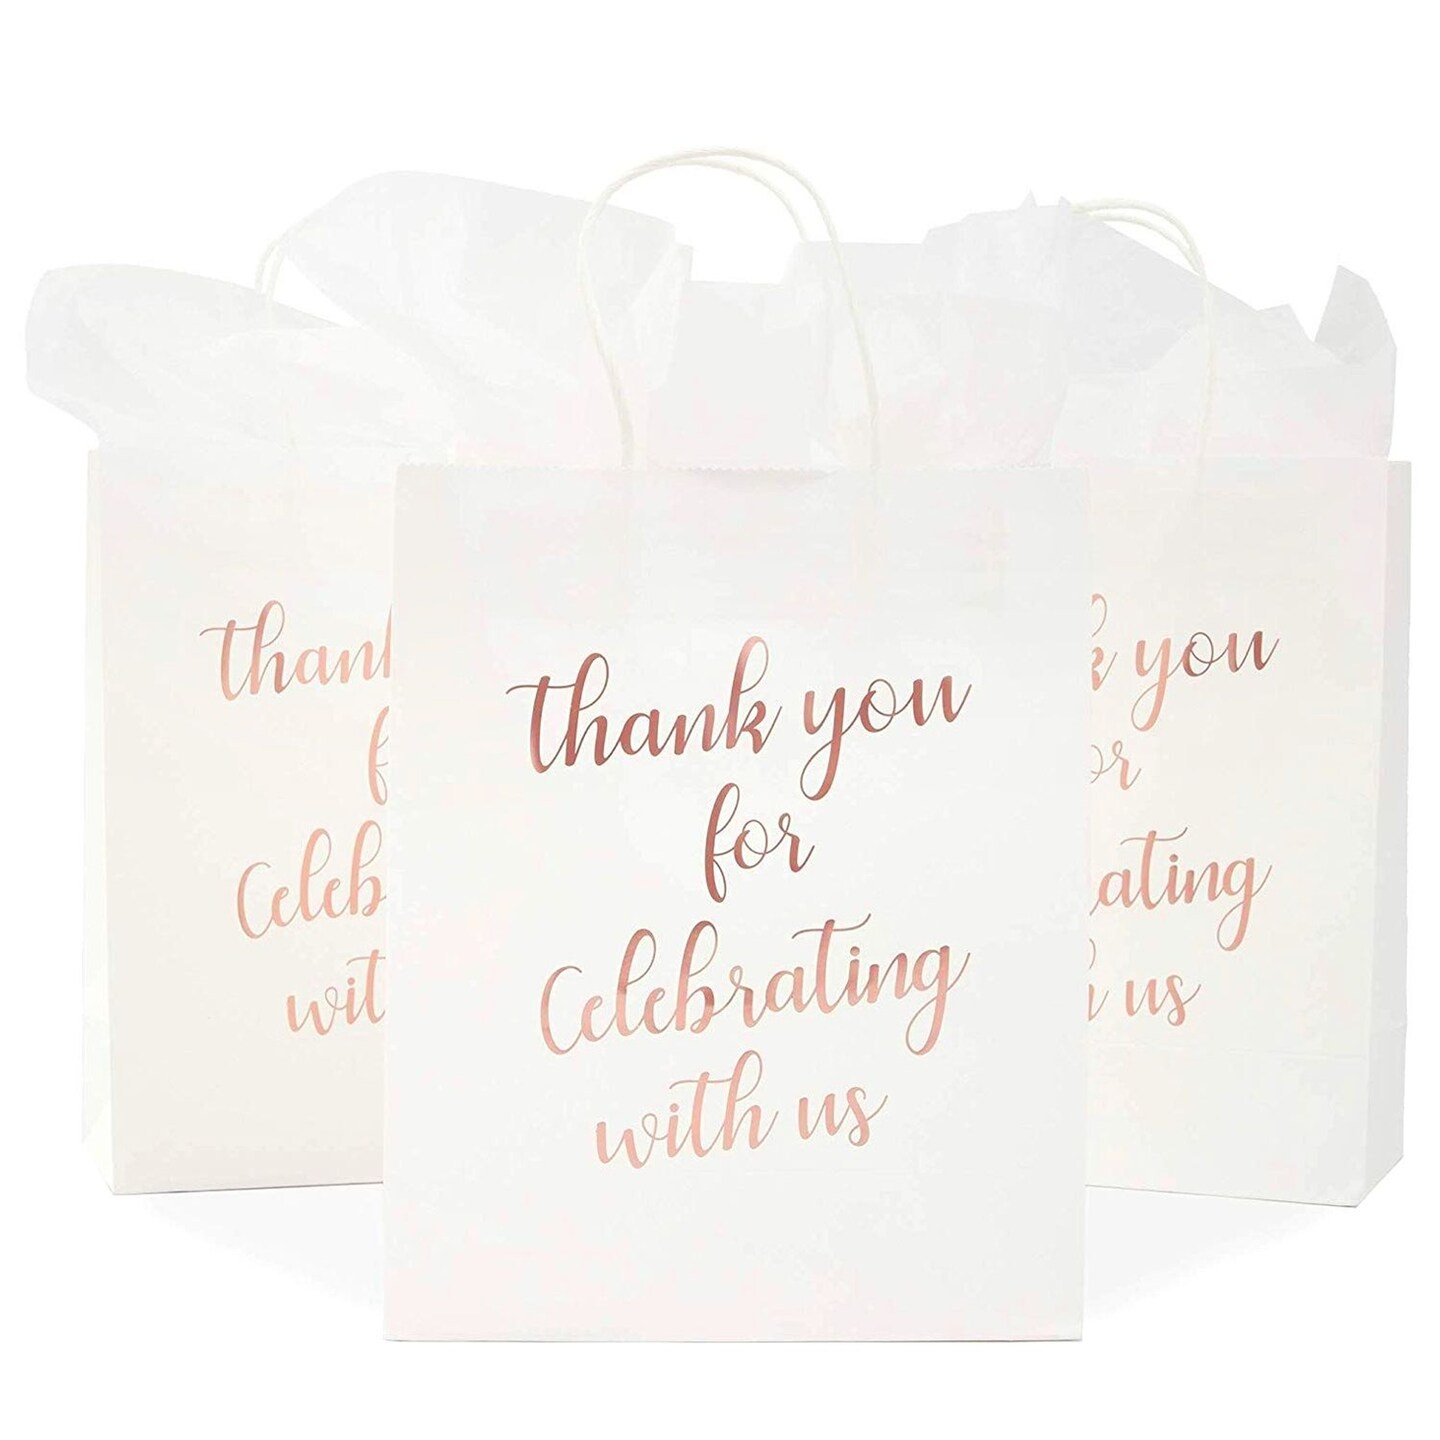 Rose Gold Gift Bags and Tissue 